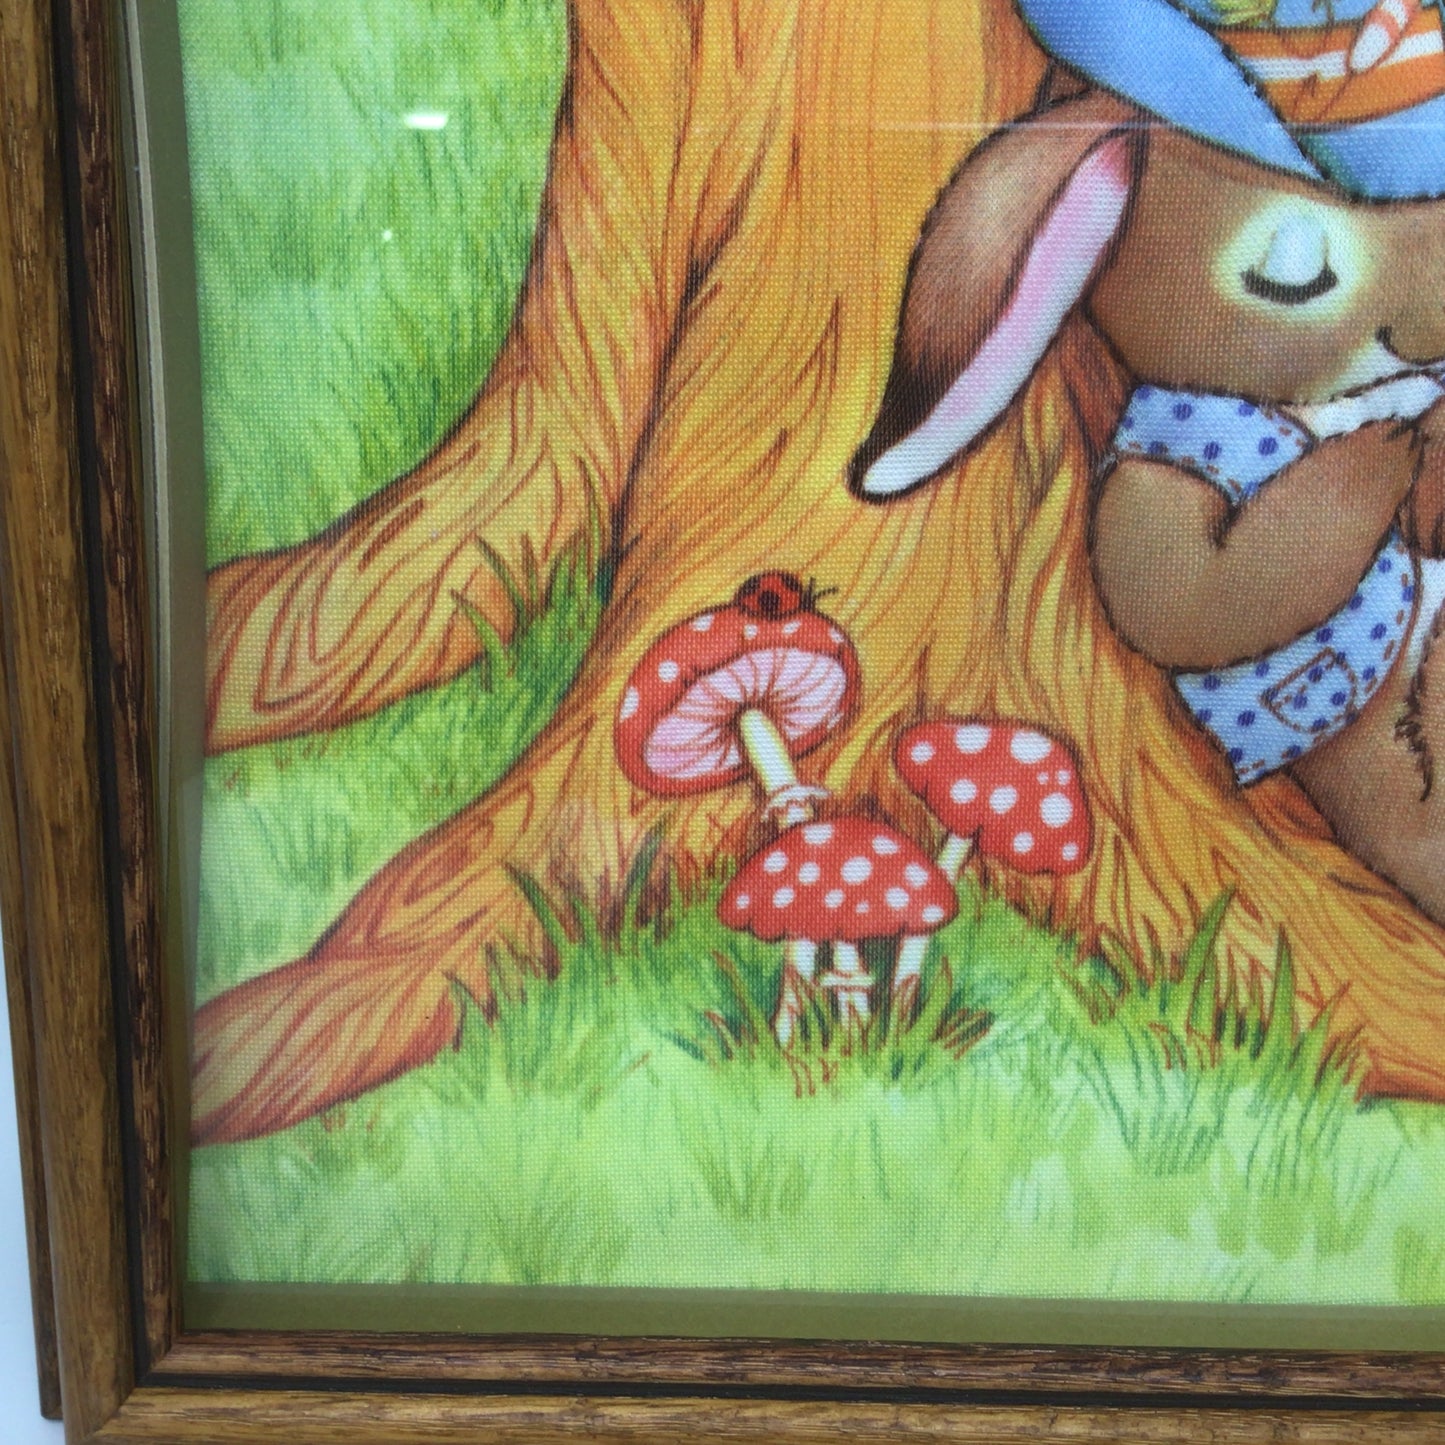 Handcrafted Bunny Picnic Picture